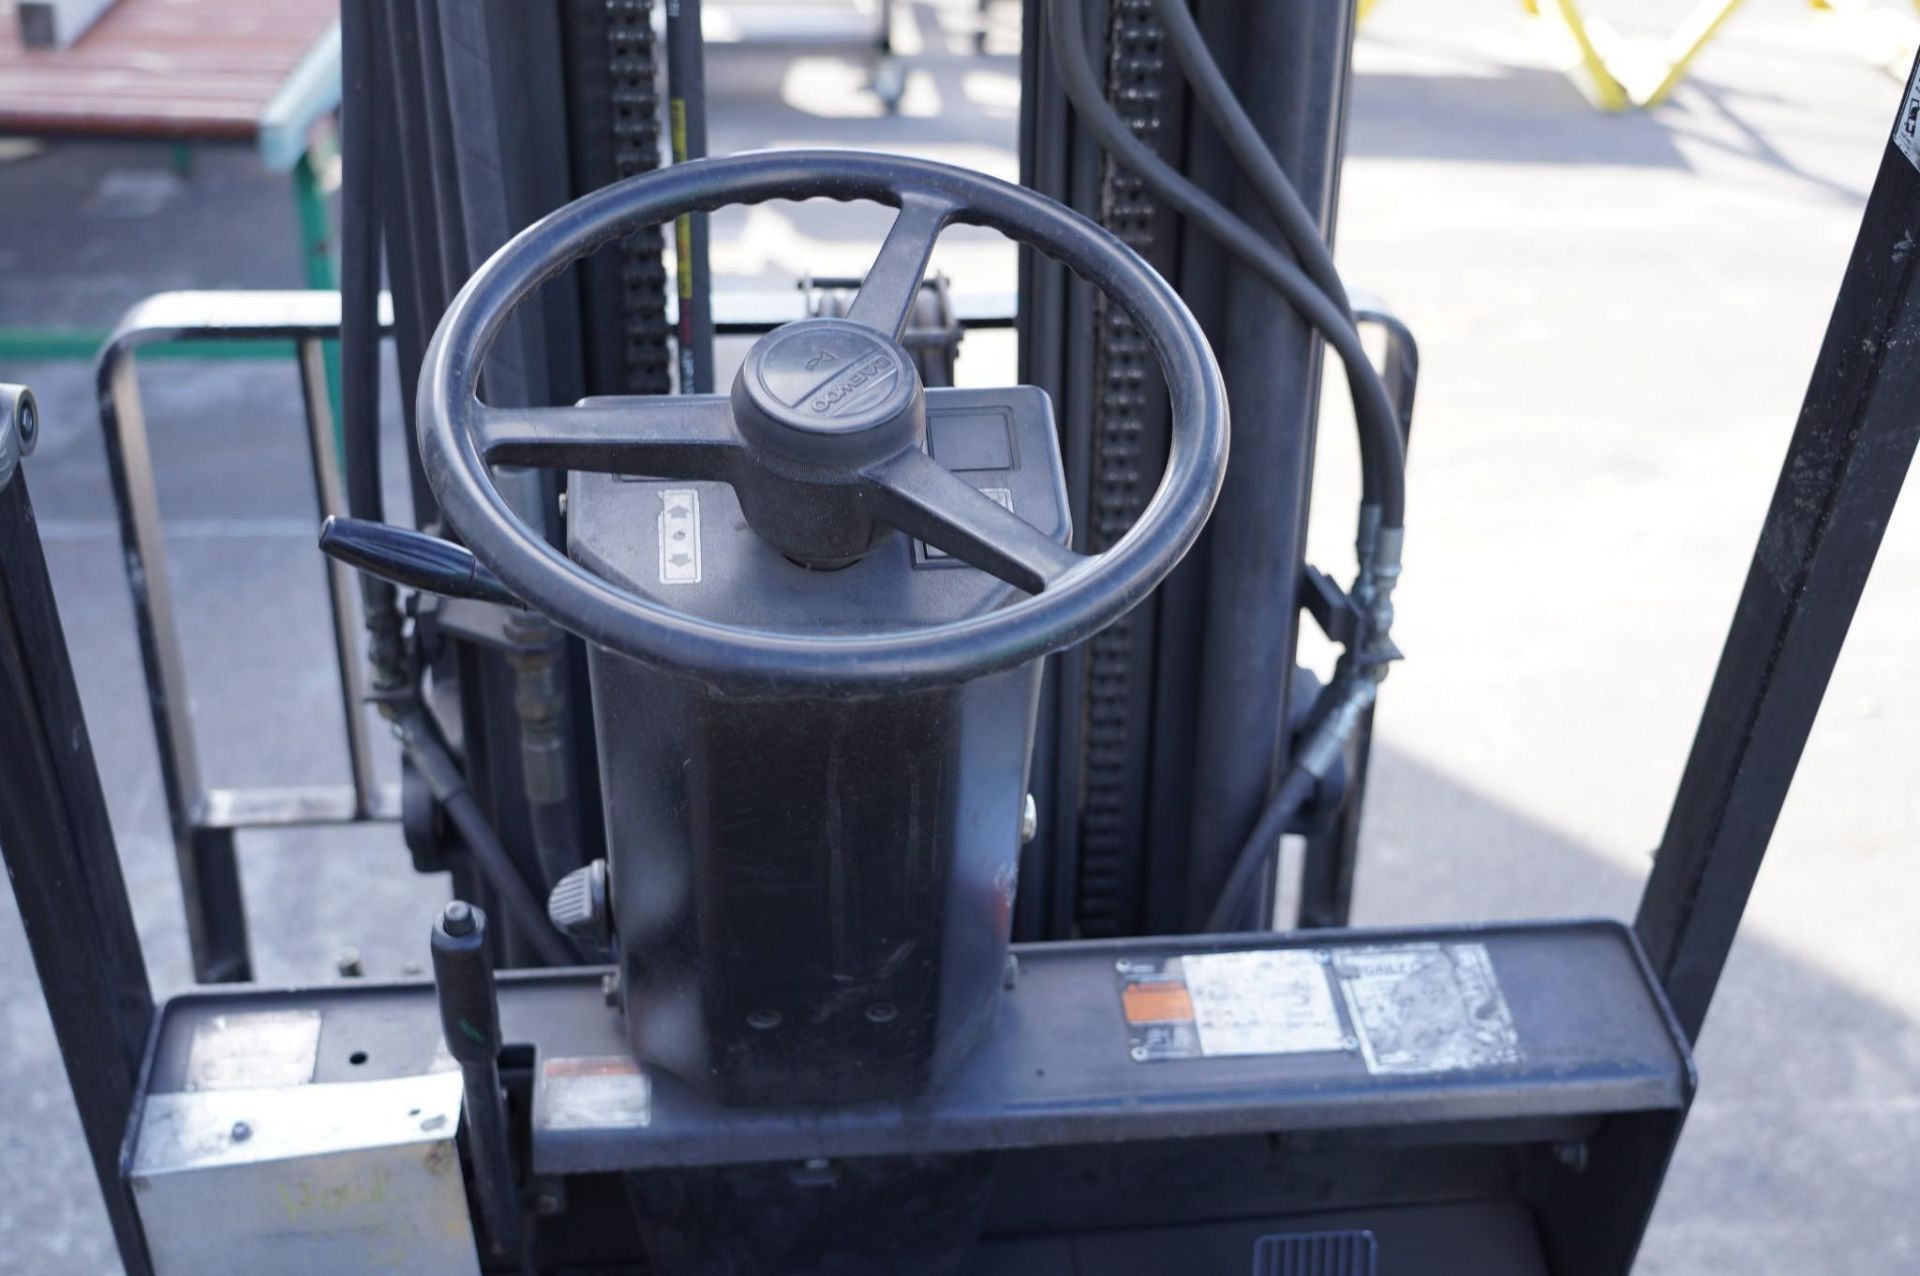 DAEWOO GC30E 5,000 LBS. CAPACITY FORKLIFT - Image 6 of 14